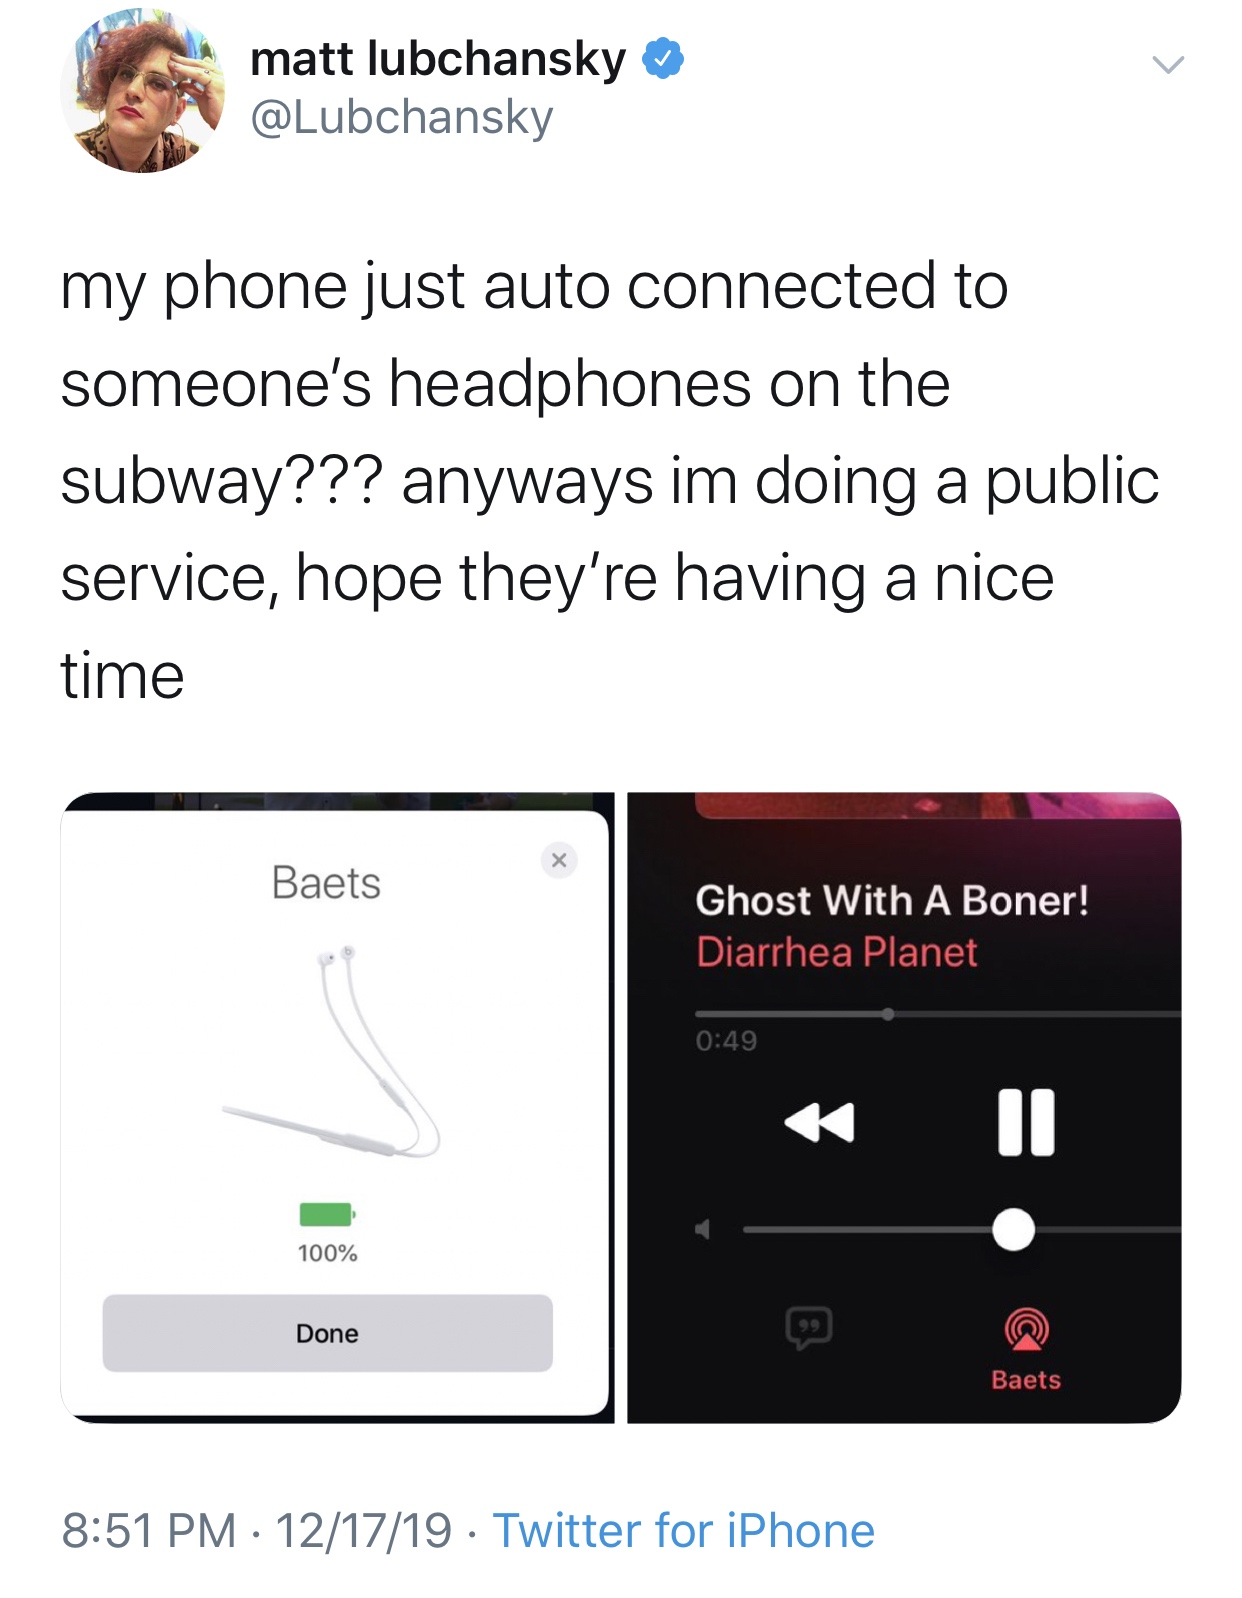 multimedia - matt lubchansky my phone just auto connected to someone's headphones on the subway??? anyways im doing a public service, hope they're having a nice time Baets Ghost With A Boner! Diarrhea Planet 100% Done Baets 121719. Twitter for iPhone